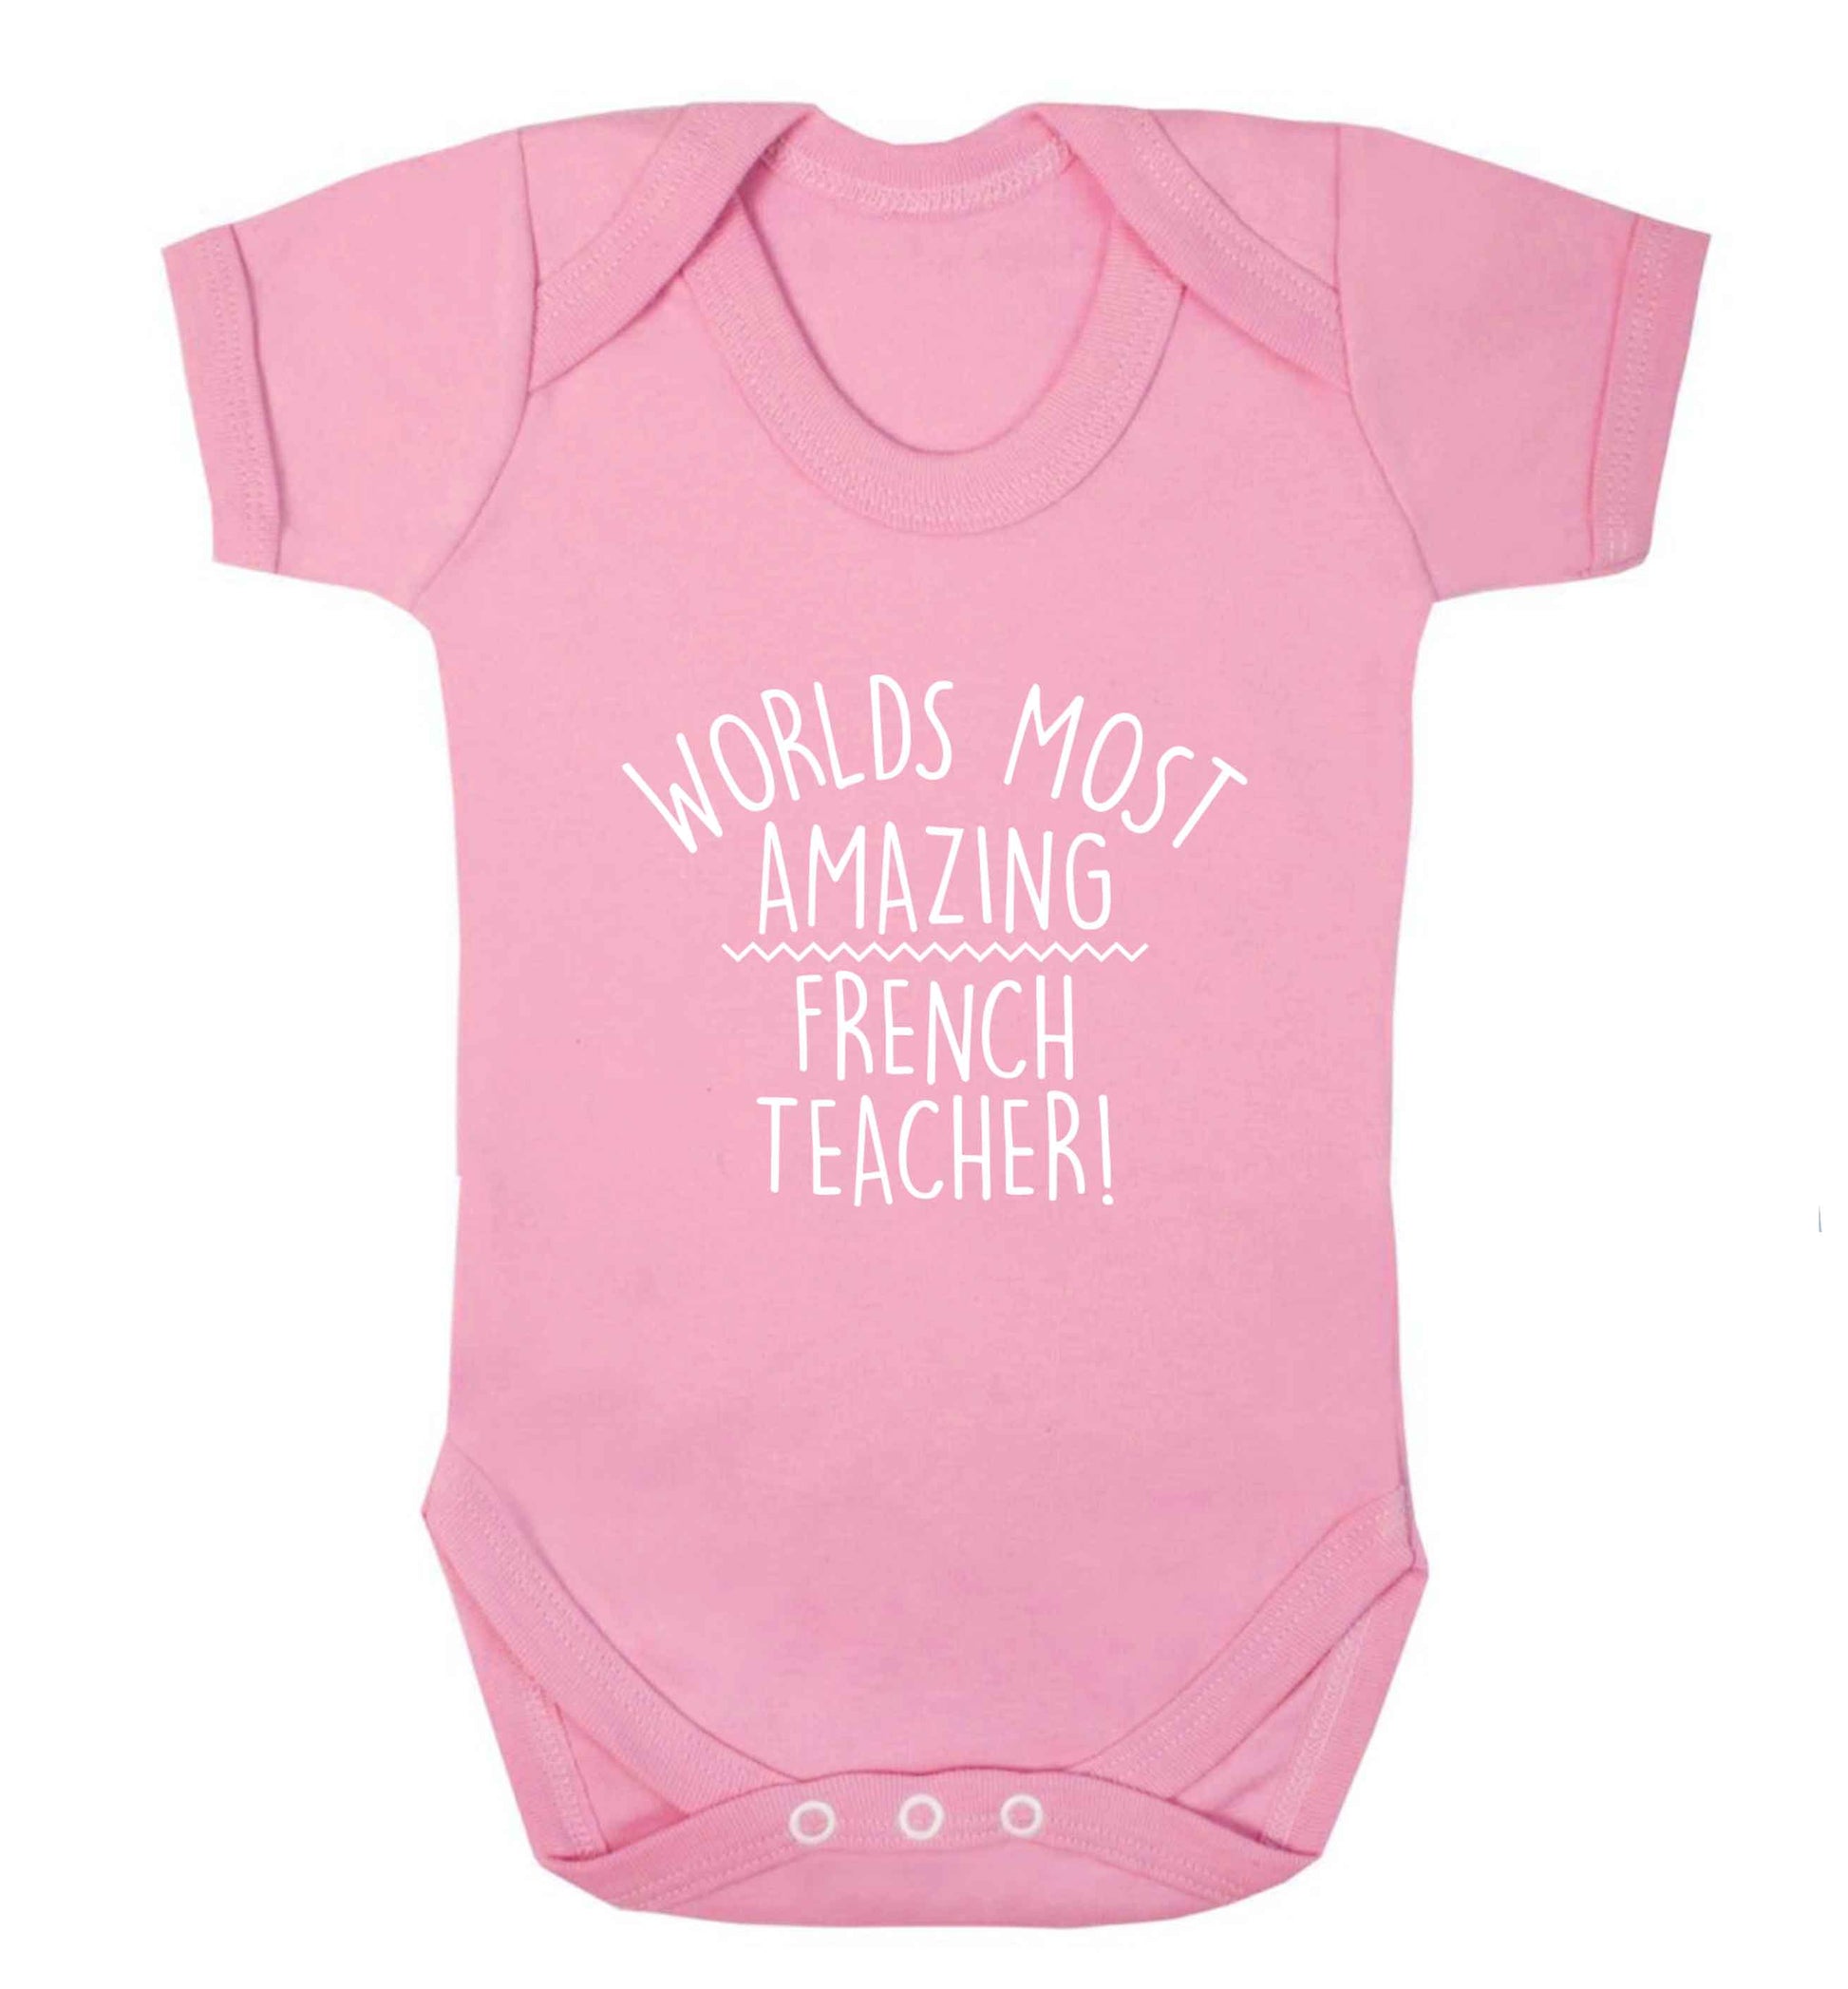 Worlds most amazing French teacher baby vest pale pink 18-24 months